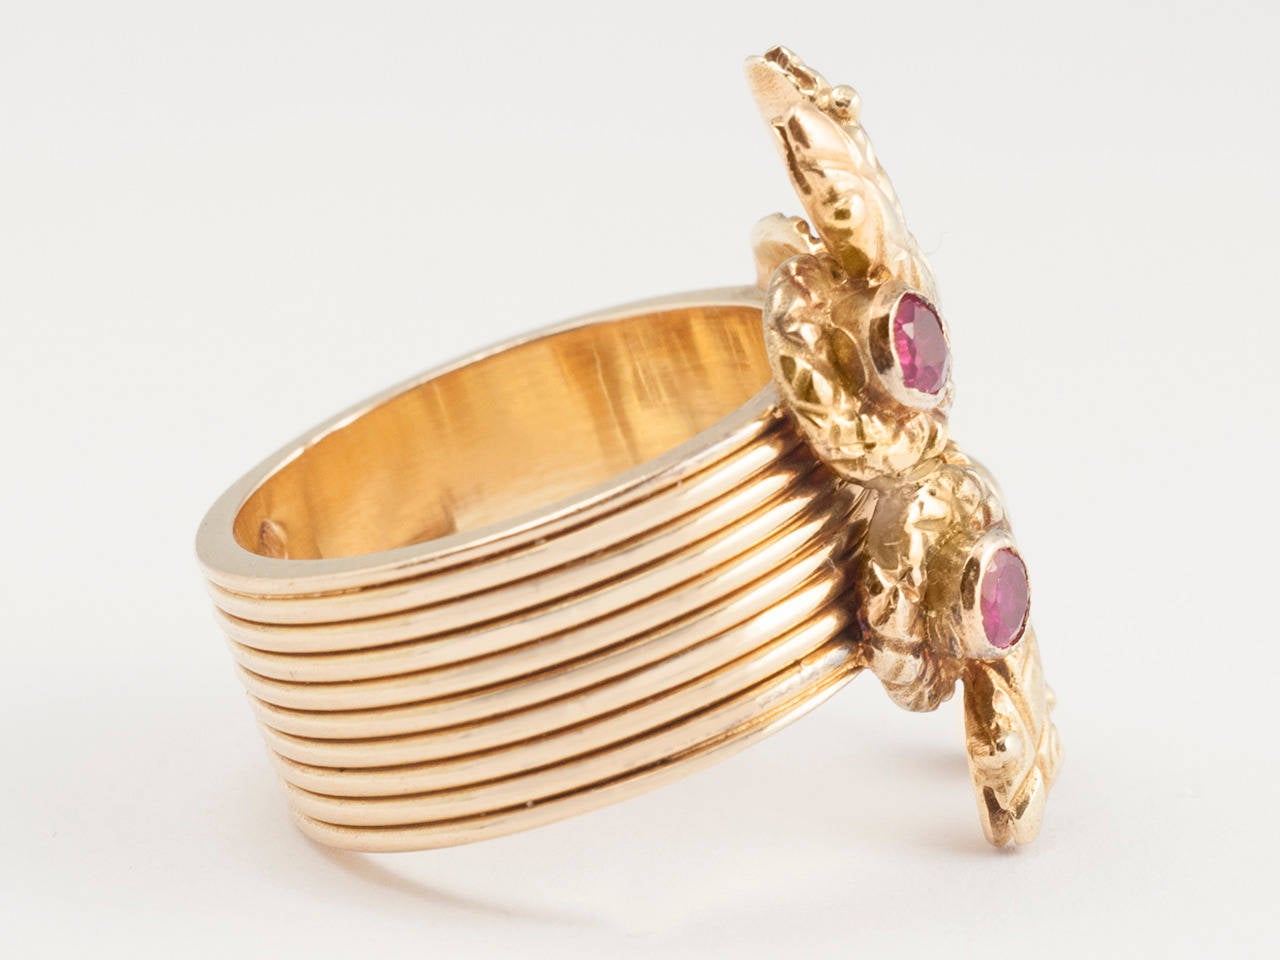 18 kt. Gold ring with fluted shank, centering 4 coiled snakes with cabochon ruby heads. signed.